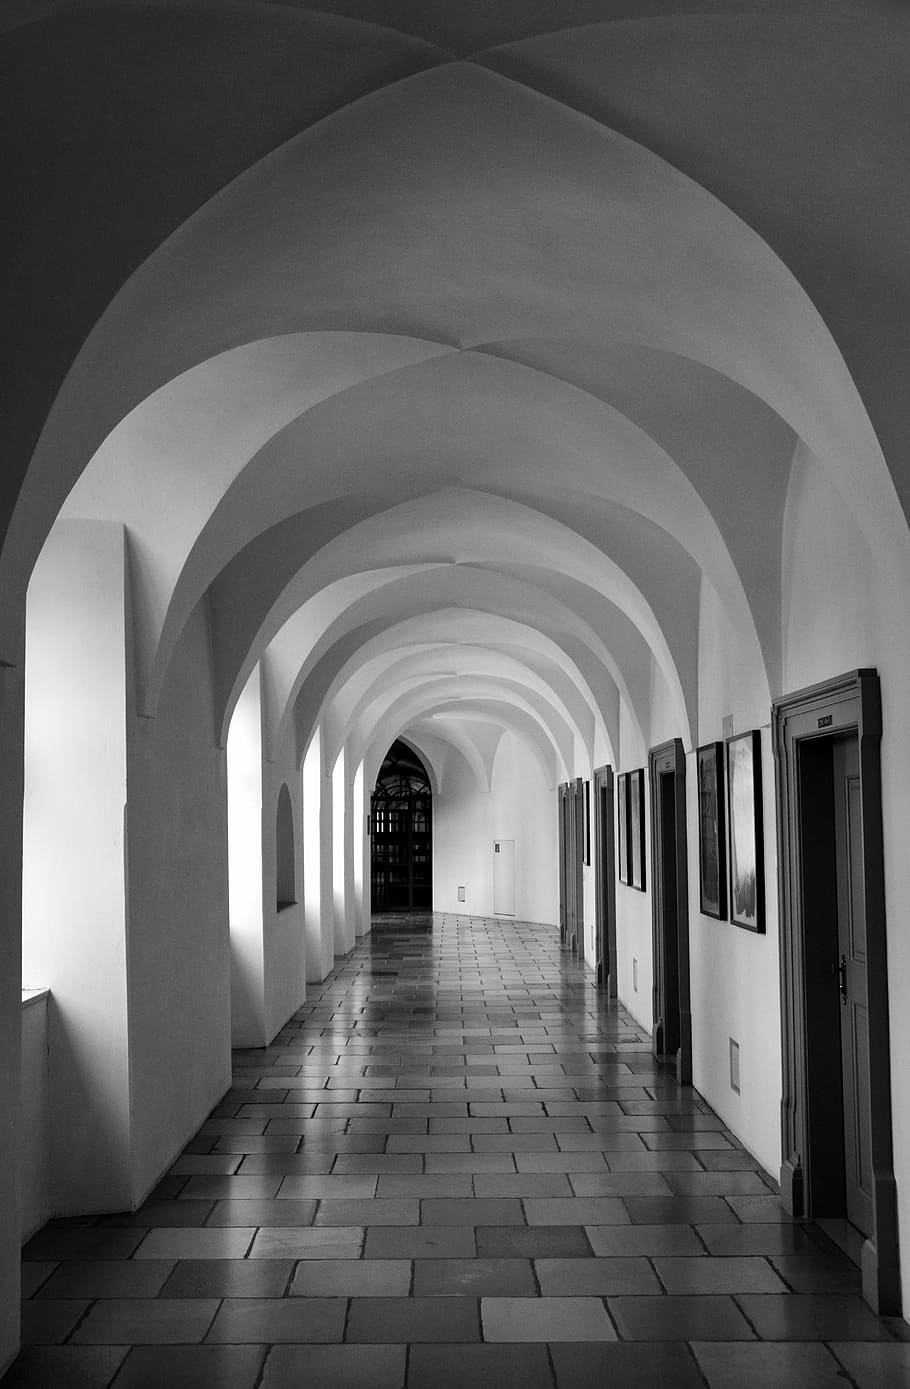 corridor, doors, light, architecture, pointed arch, gang, cold, blanket, cells, monastery